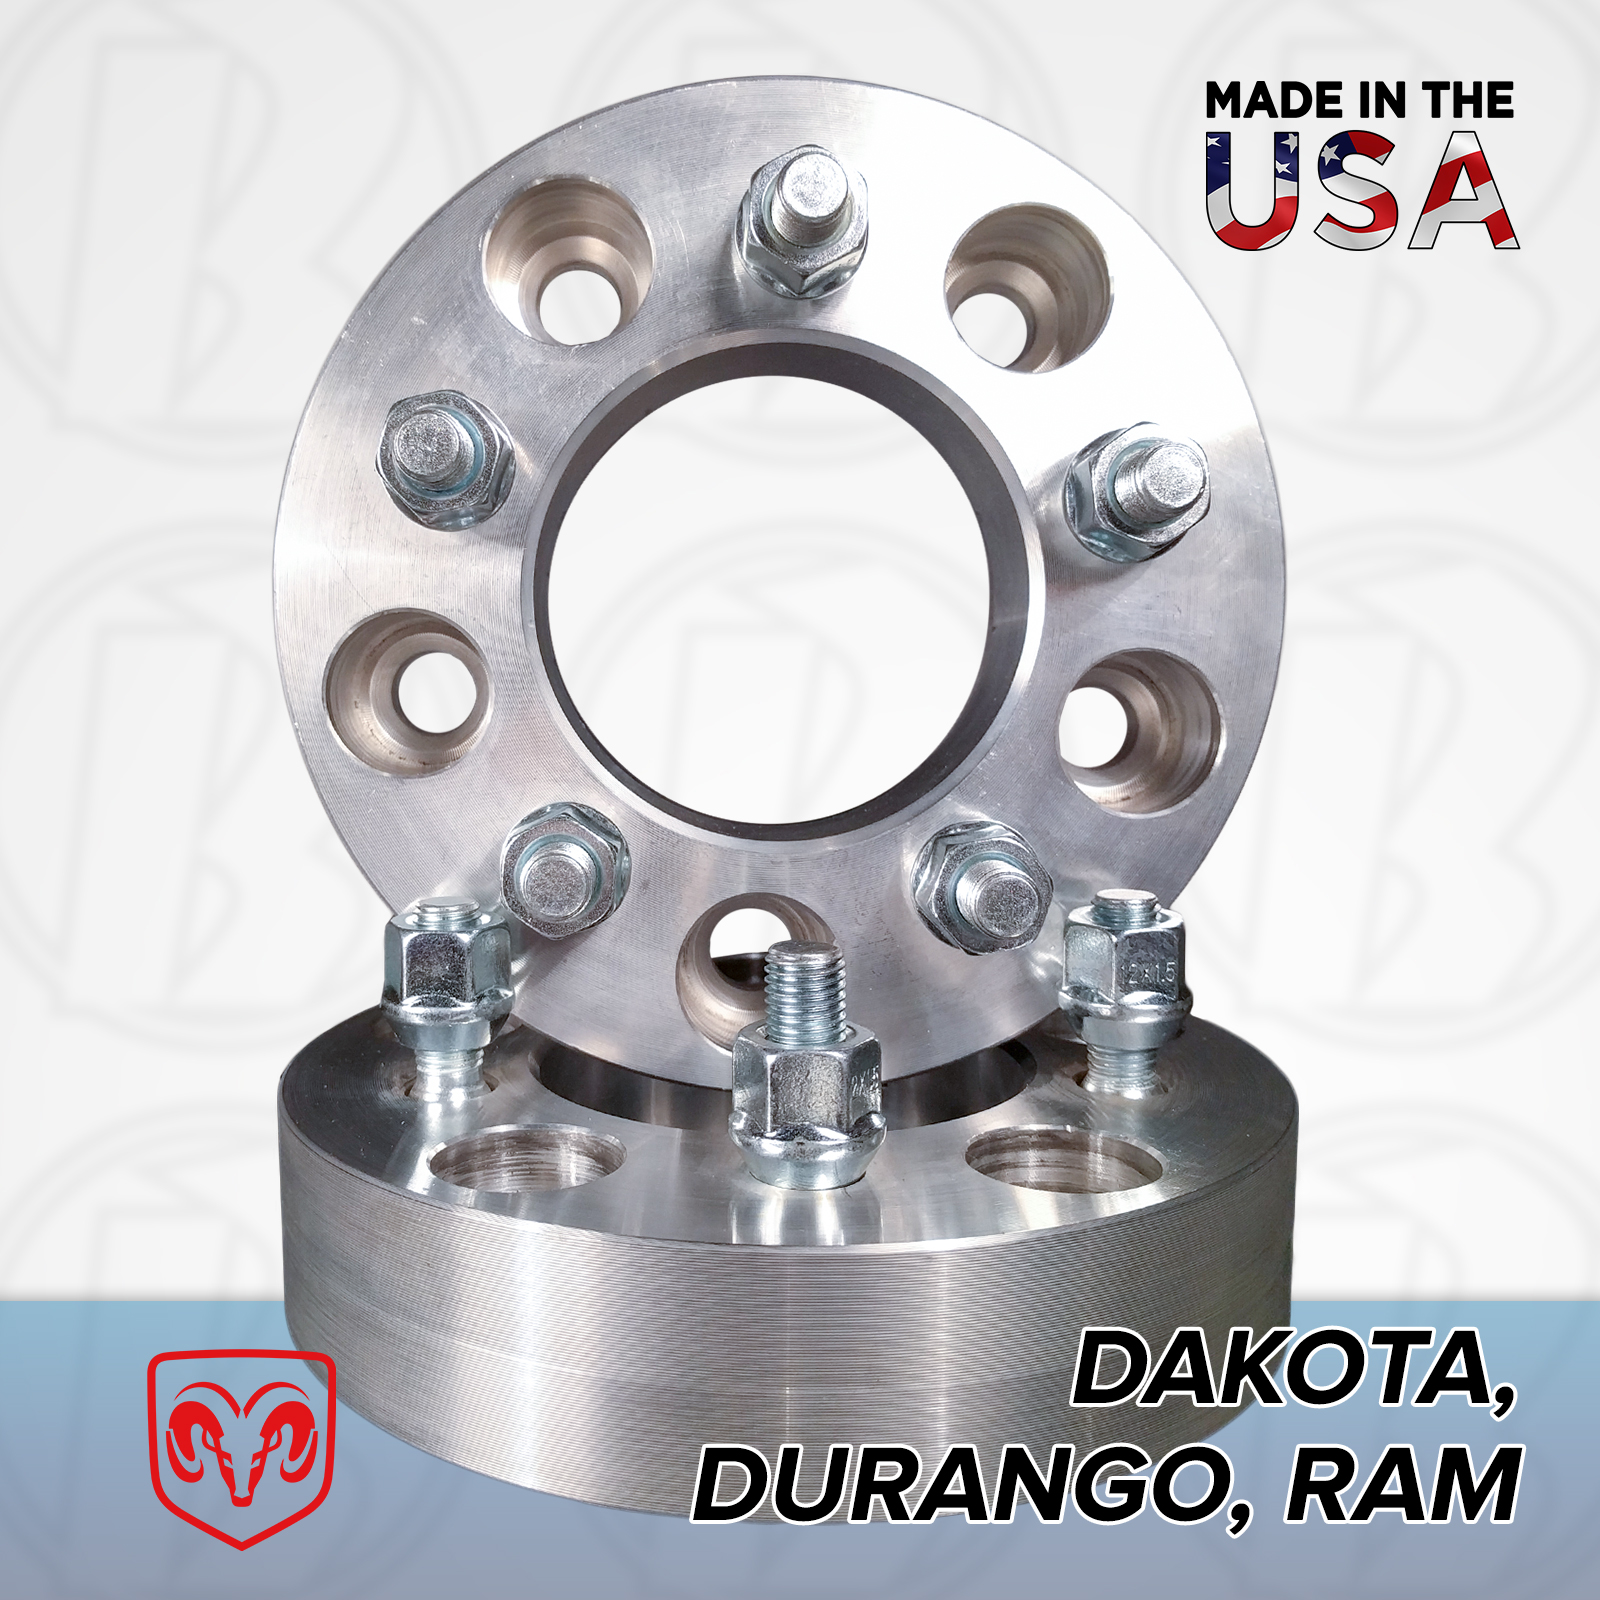 5x5.5 Dodge To 5x5 Wheel Adapters / 1" Spacers